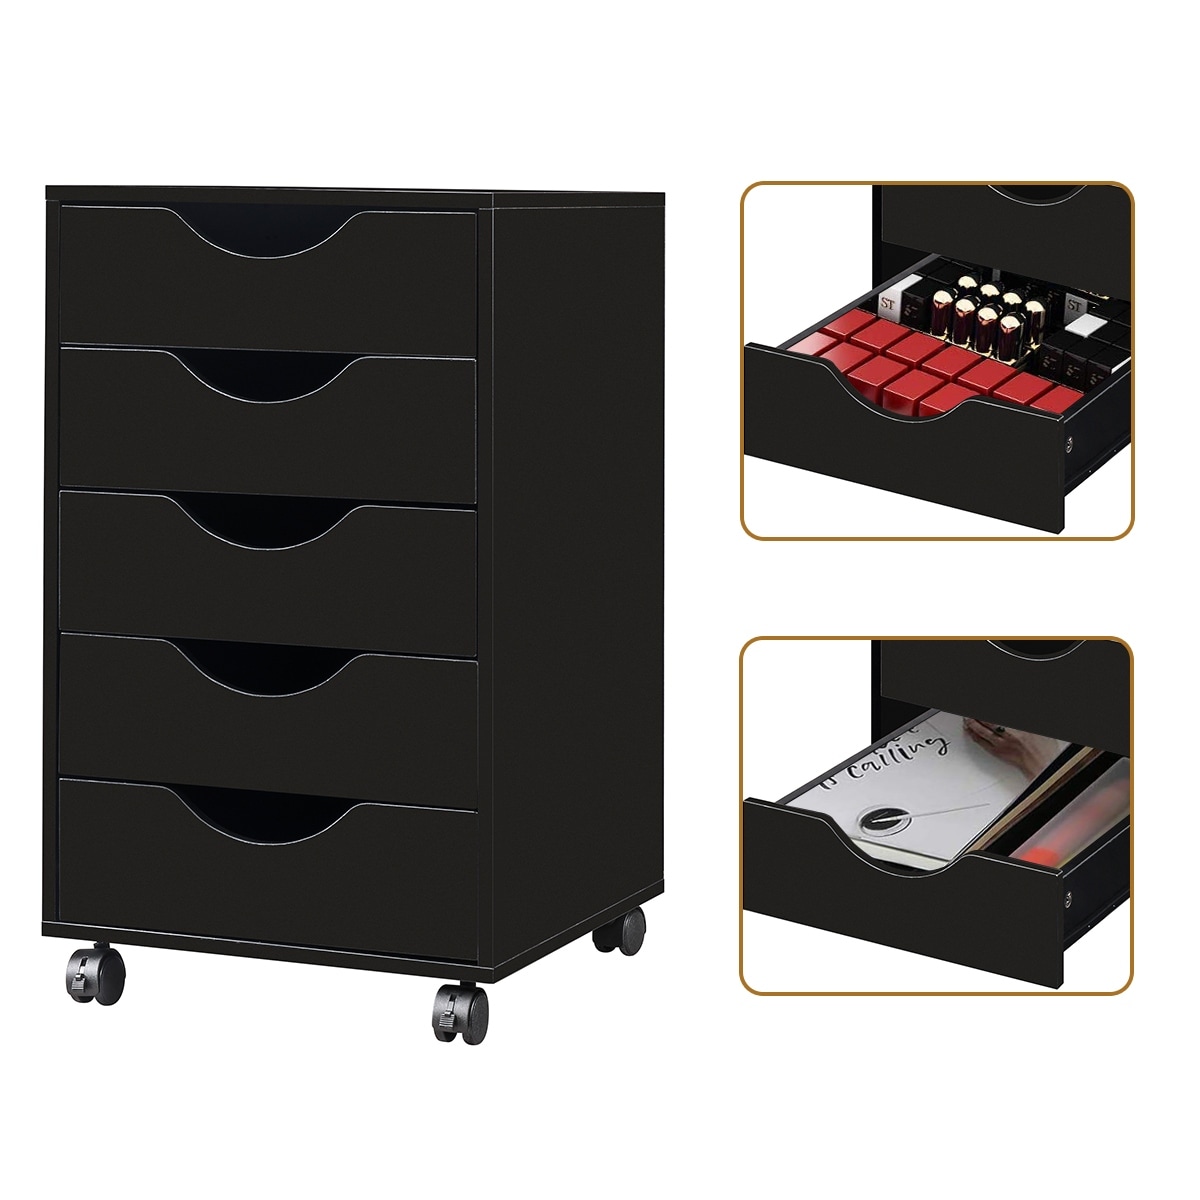 Wood Filing Storage Cart Organizer with Lockable Casters for Home and Office Black SUPER DEAL 5 Drawer Mobile Cabinet